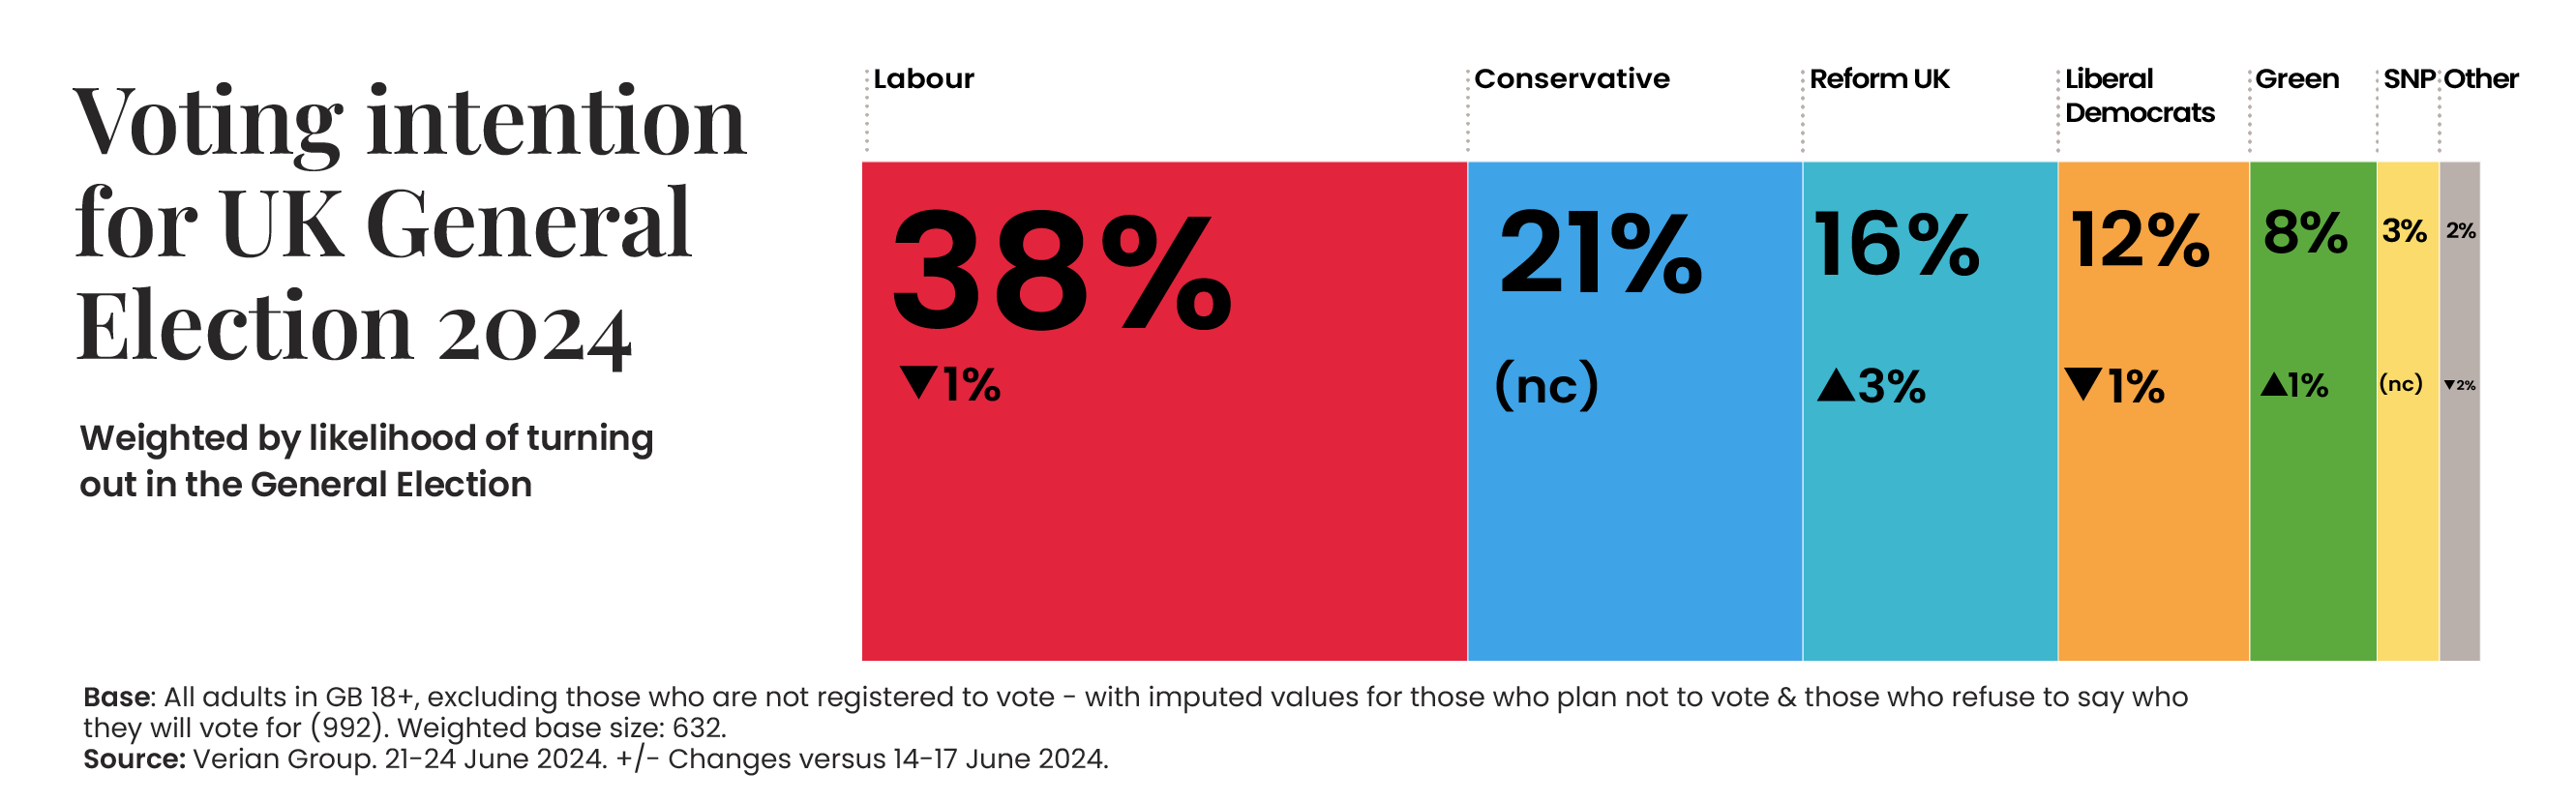 Voting Intention_2606